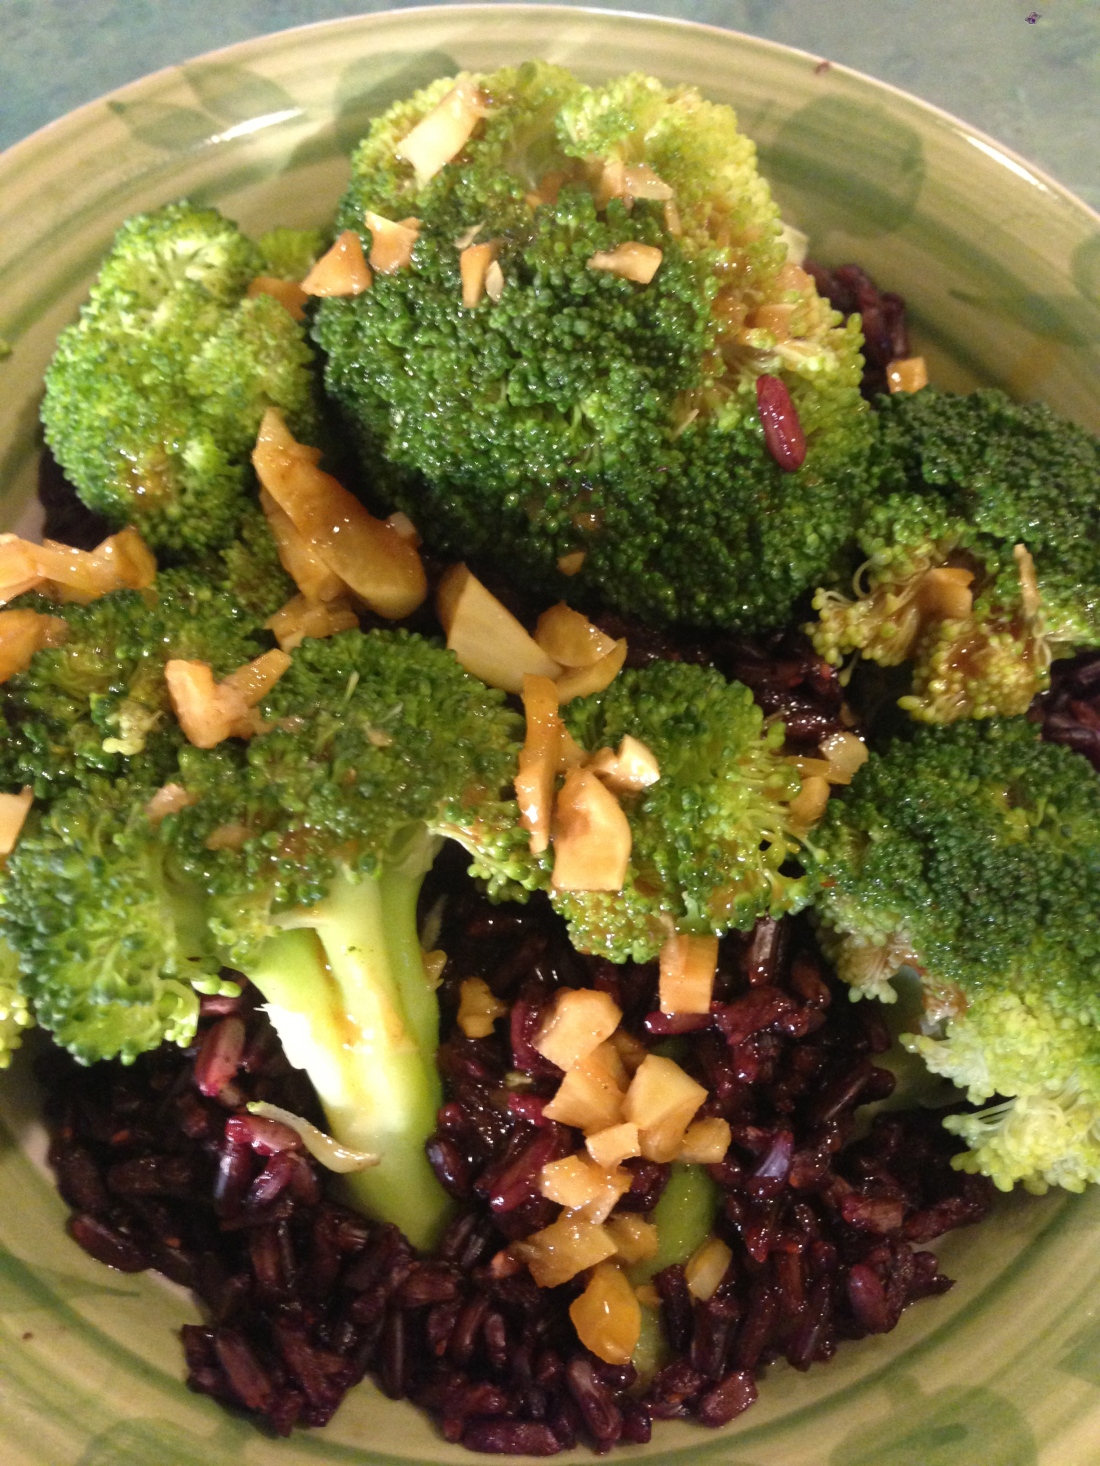 Black Rice and Steamed Broccoli with Coconut Curry Sauce